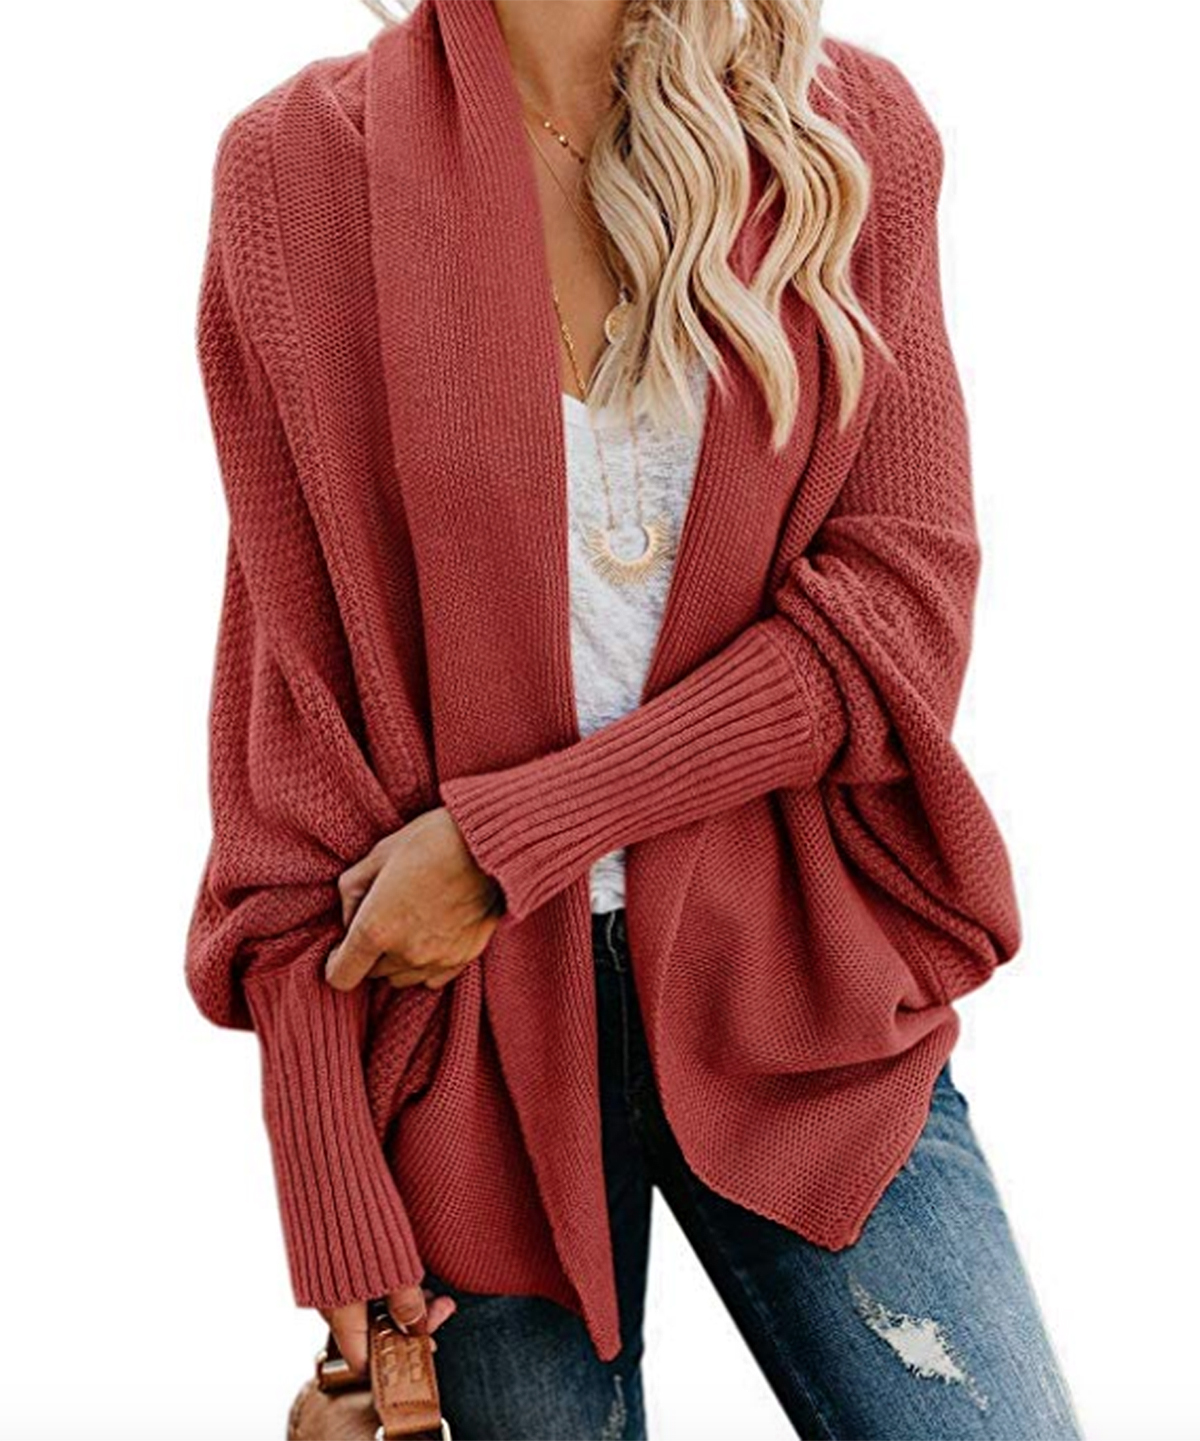 This Amazon Slouchy Sweater Is a Total Fall Closet Staple | Us Weekly